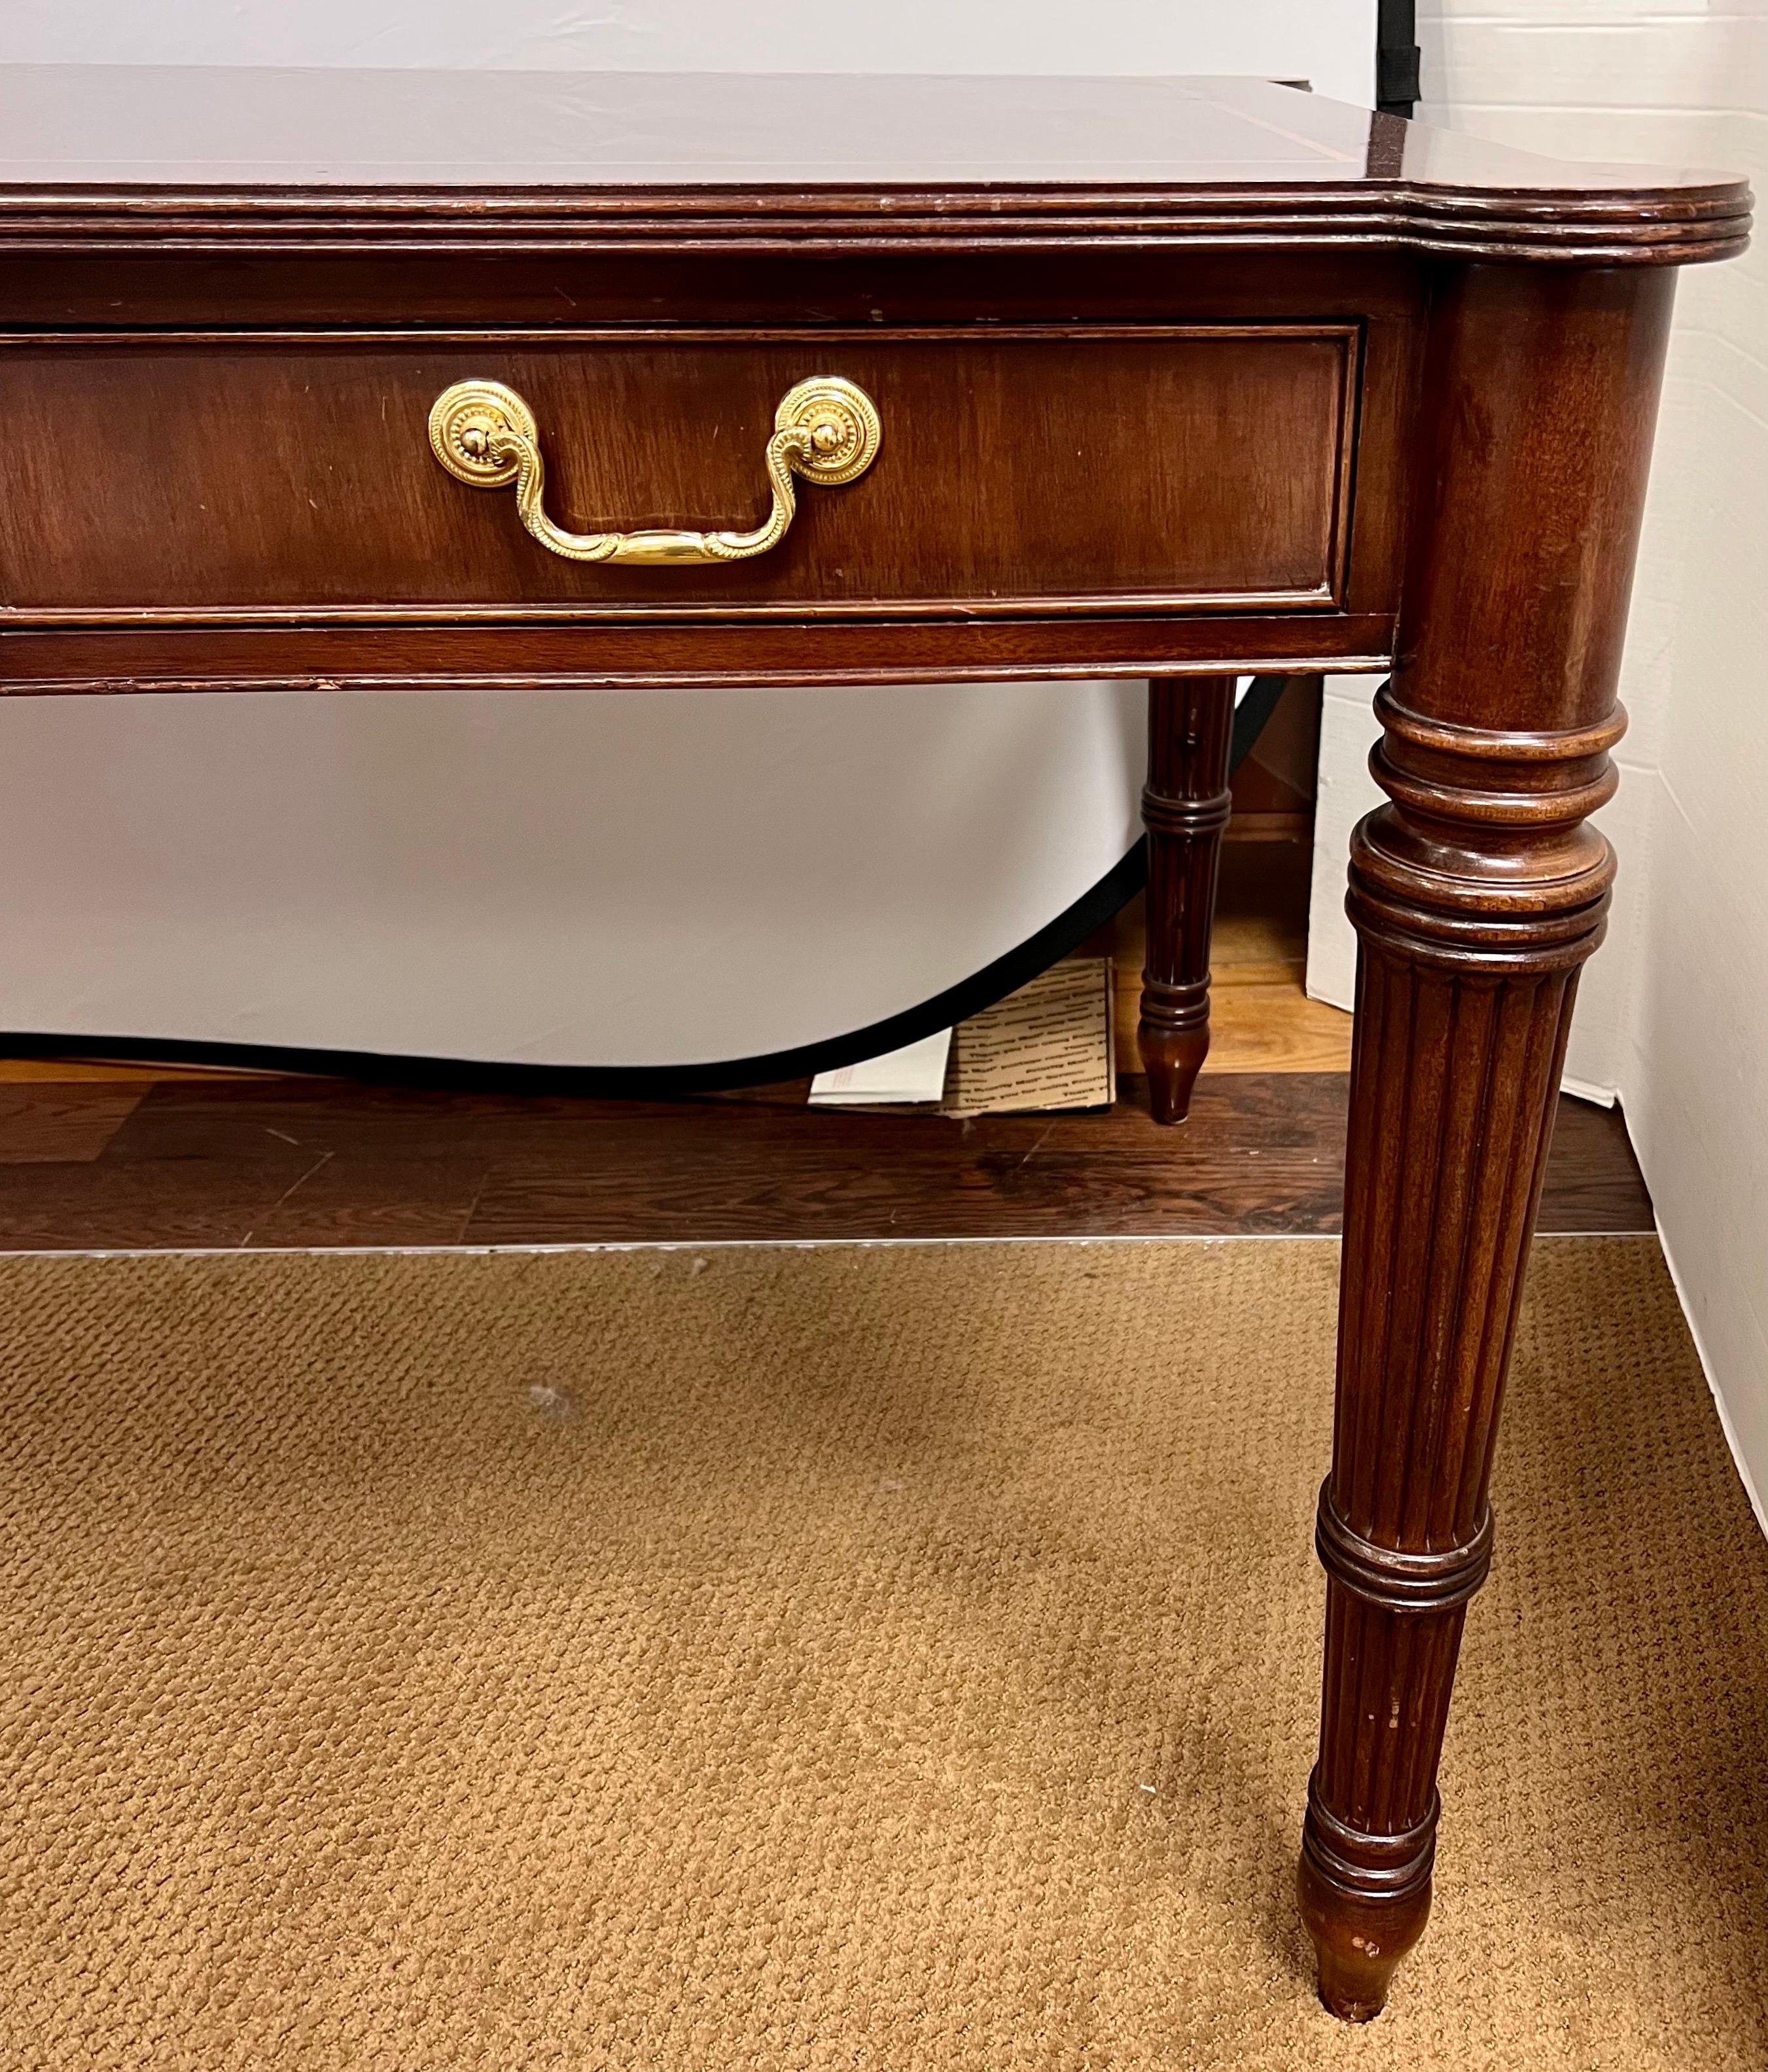 Classic handcrafted mahogany library or executive writing desk with three drawers and beautiful flame mahogany top on fluted legs.  All original brass pulls.  Removable custom protective glass top included.